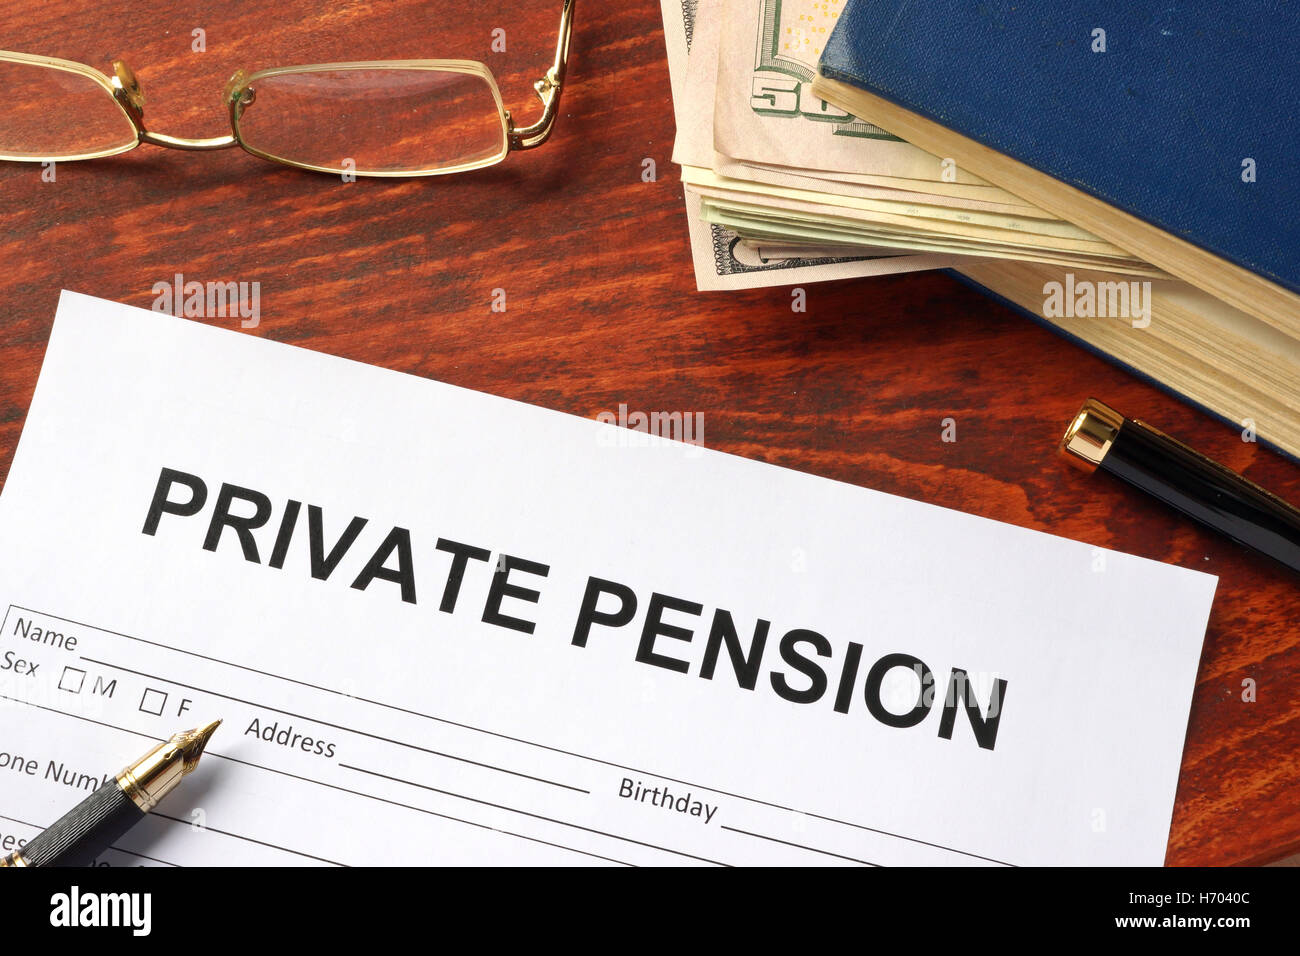 Private pension form on an office table. Stock Photo